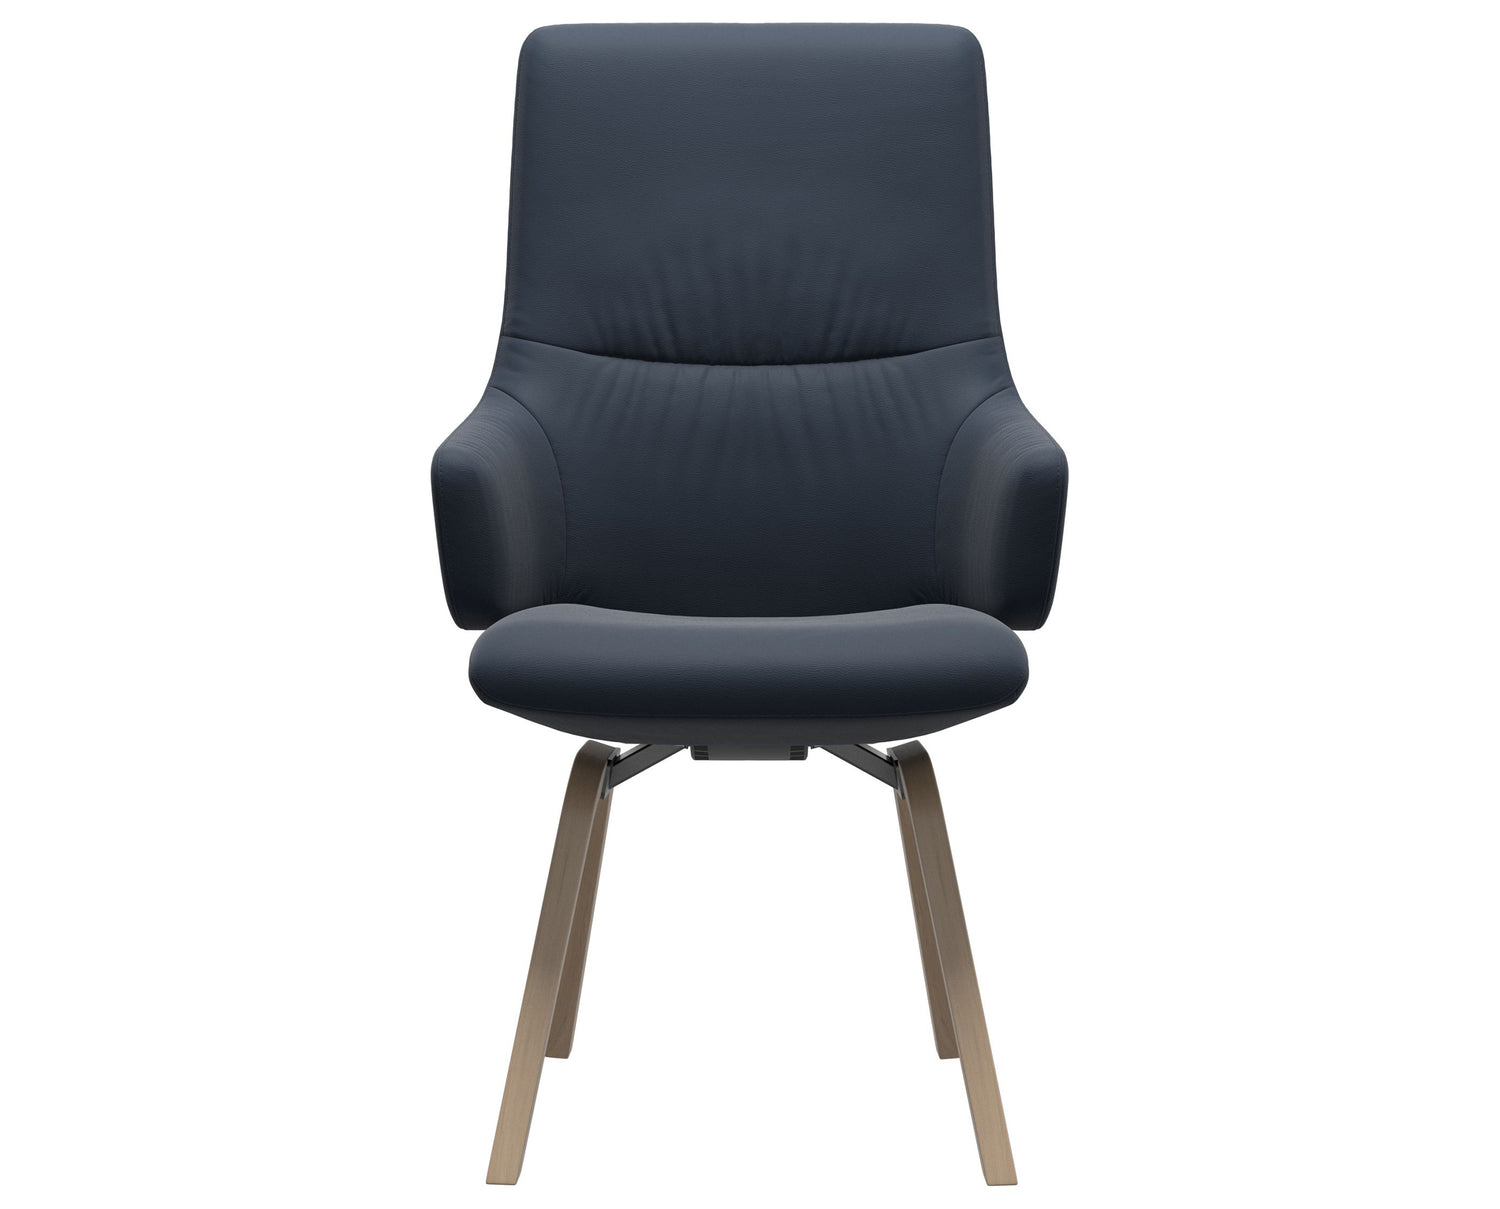 Paloma Leather Oxford Blue & Natural Base | Stressless Mint High Back D200 Dining Chair w/Arms | Valley Ridge Furniture